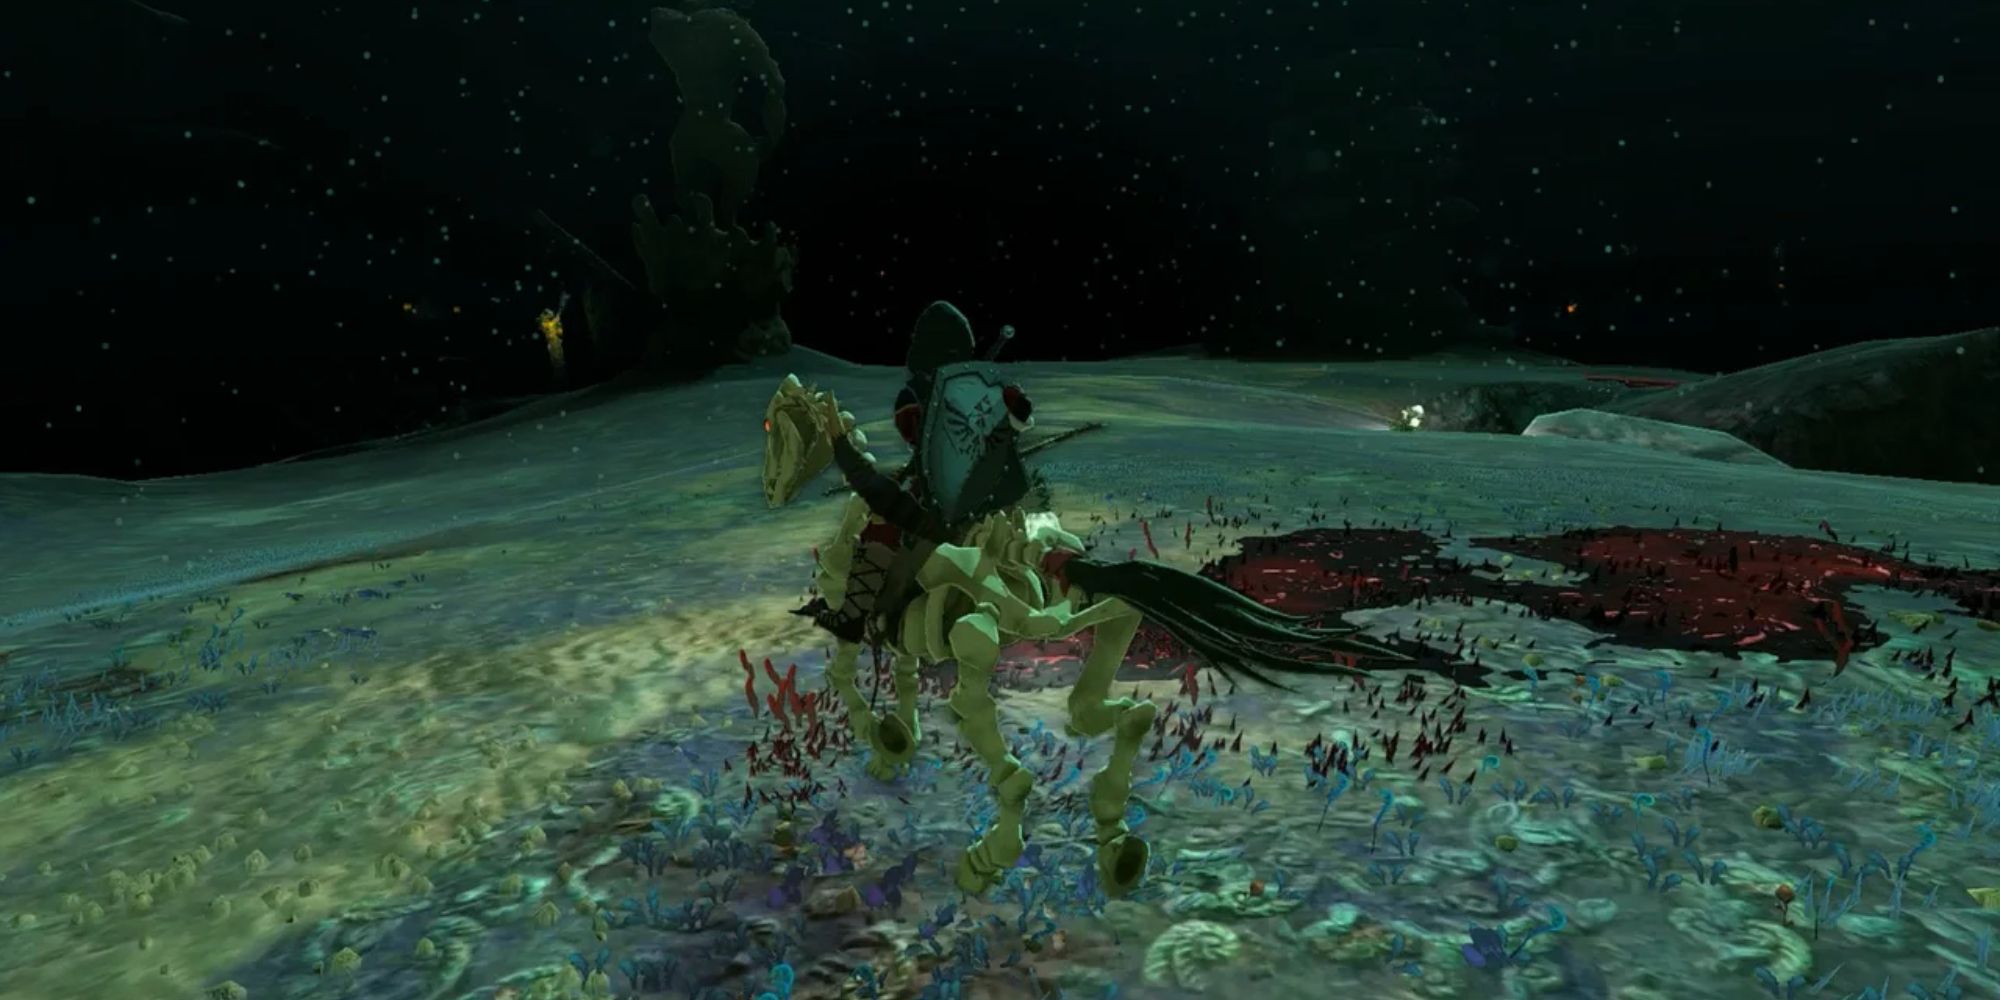 Link riding a Stalhorse in the Depths